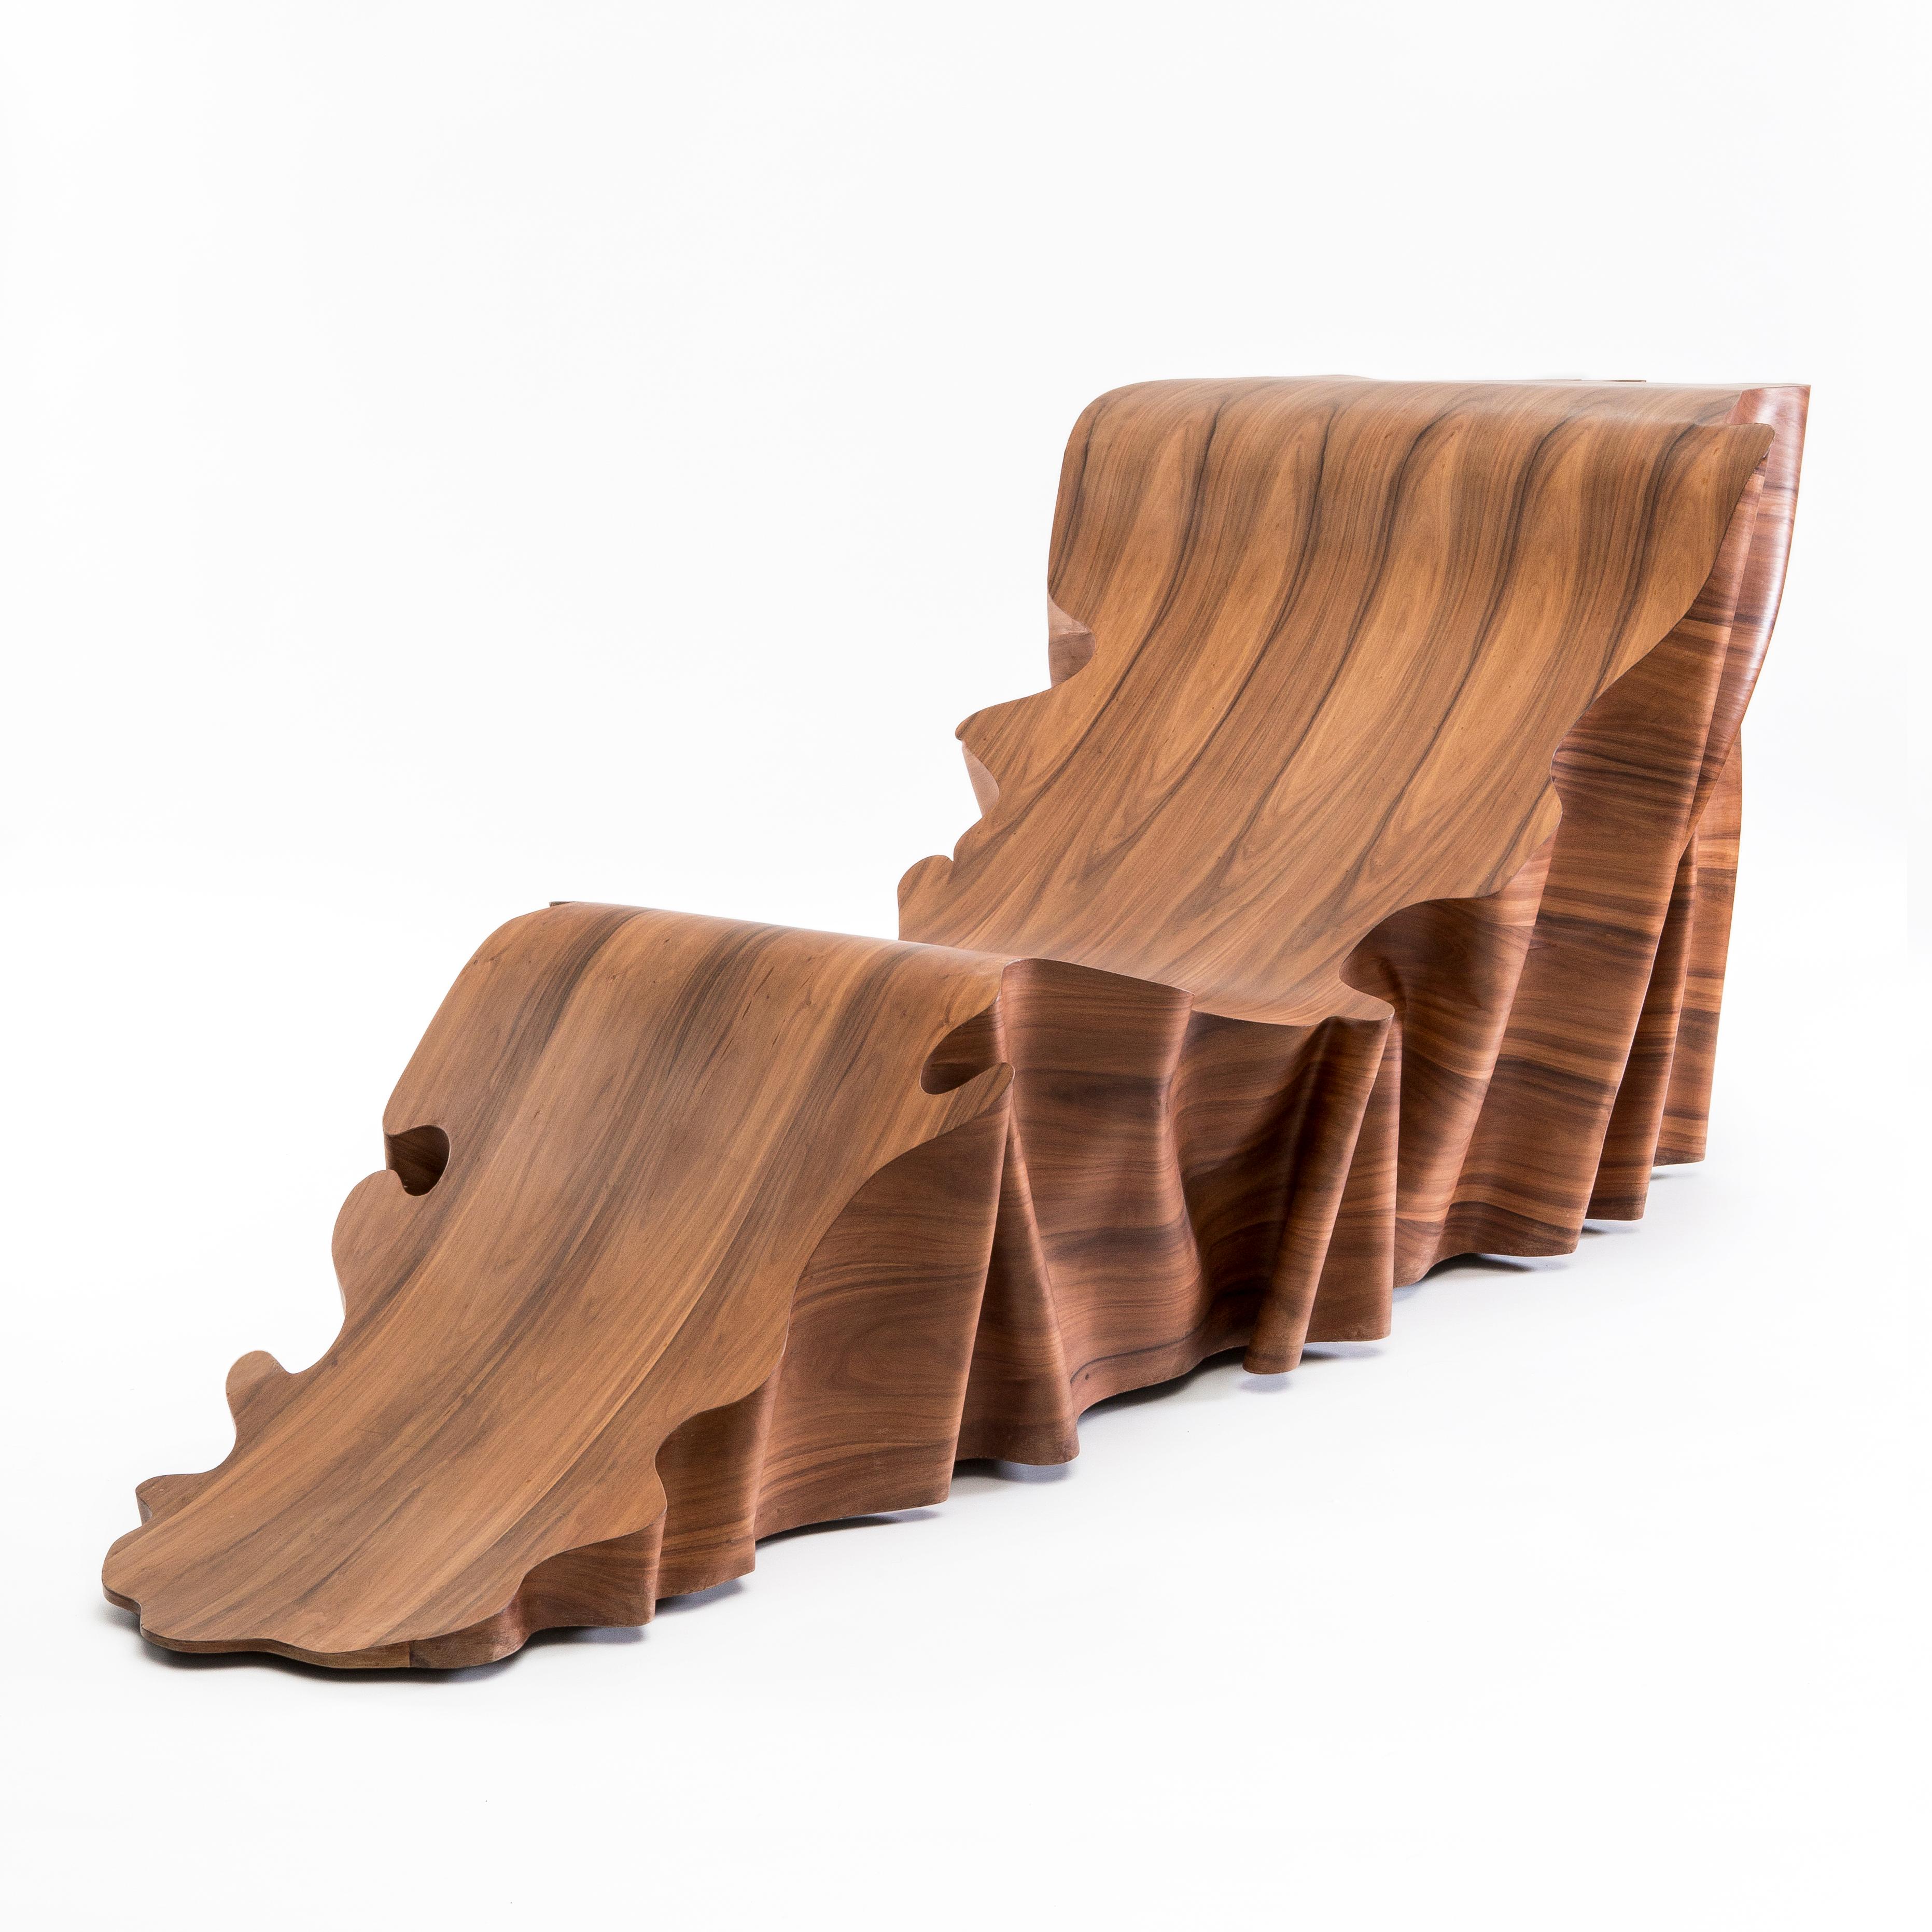 Una, Articolo Indeterminativo Chaise Longue by Secondome Edizioni
Limited Edition Of 9 Pieces + 3 A.P.
Designer: Stefano Marolla.
Dimensions: D 86 x W 225 x H 85 cm.
Materials: Santos rosewood.

Collection / Production: Secondome. This piece can be